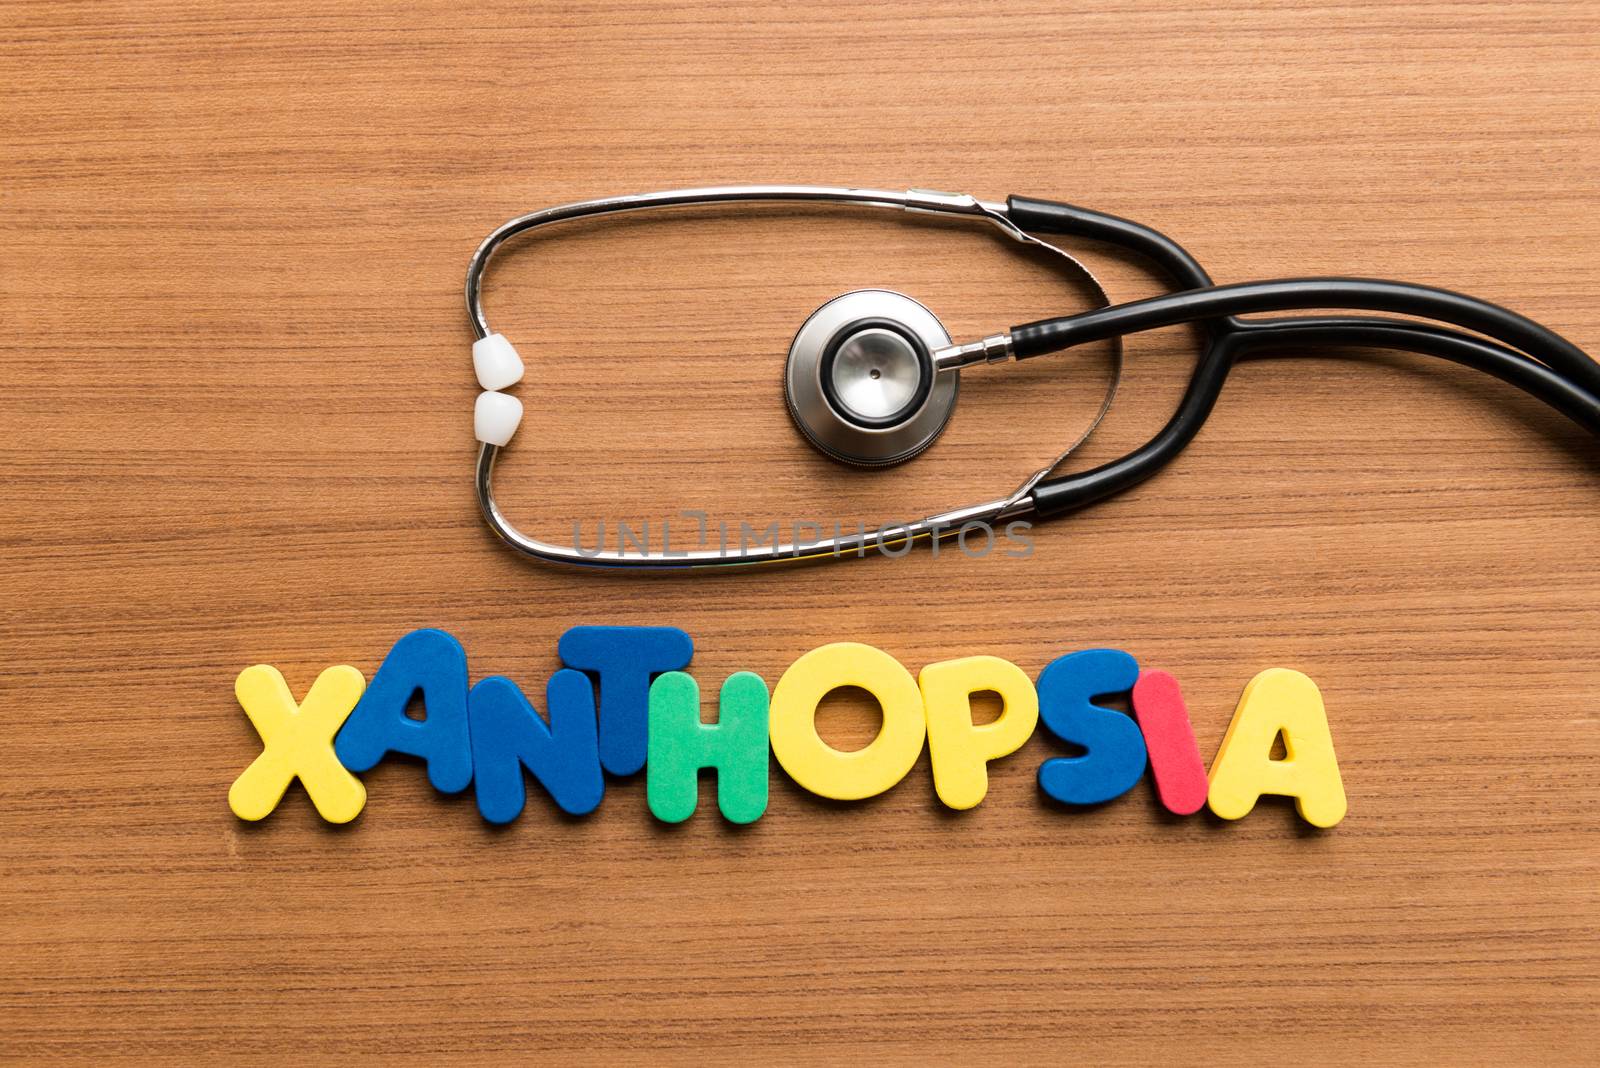 xanthopsia colorful word with stethoscope by sohel.parvez@hotmail.com